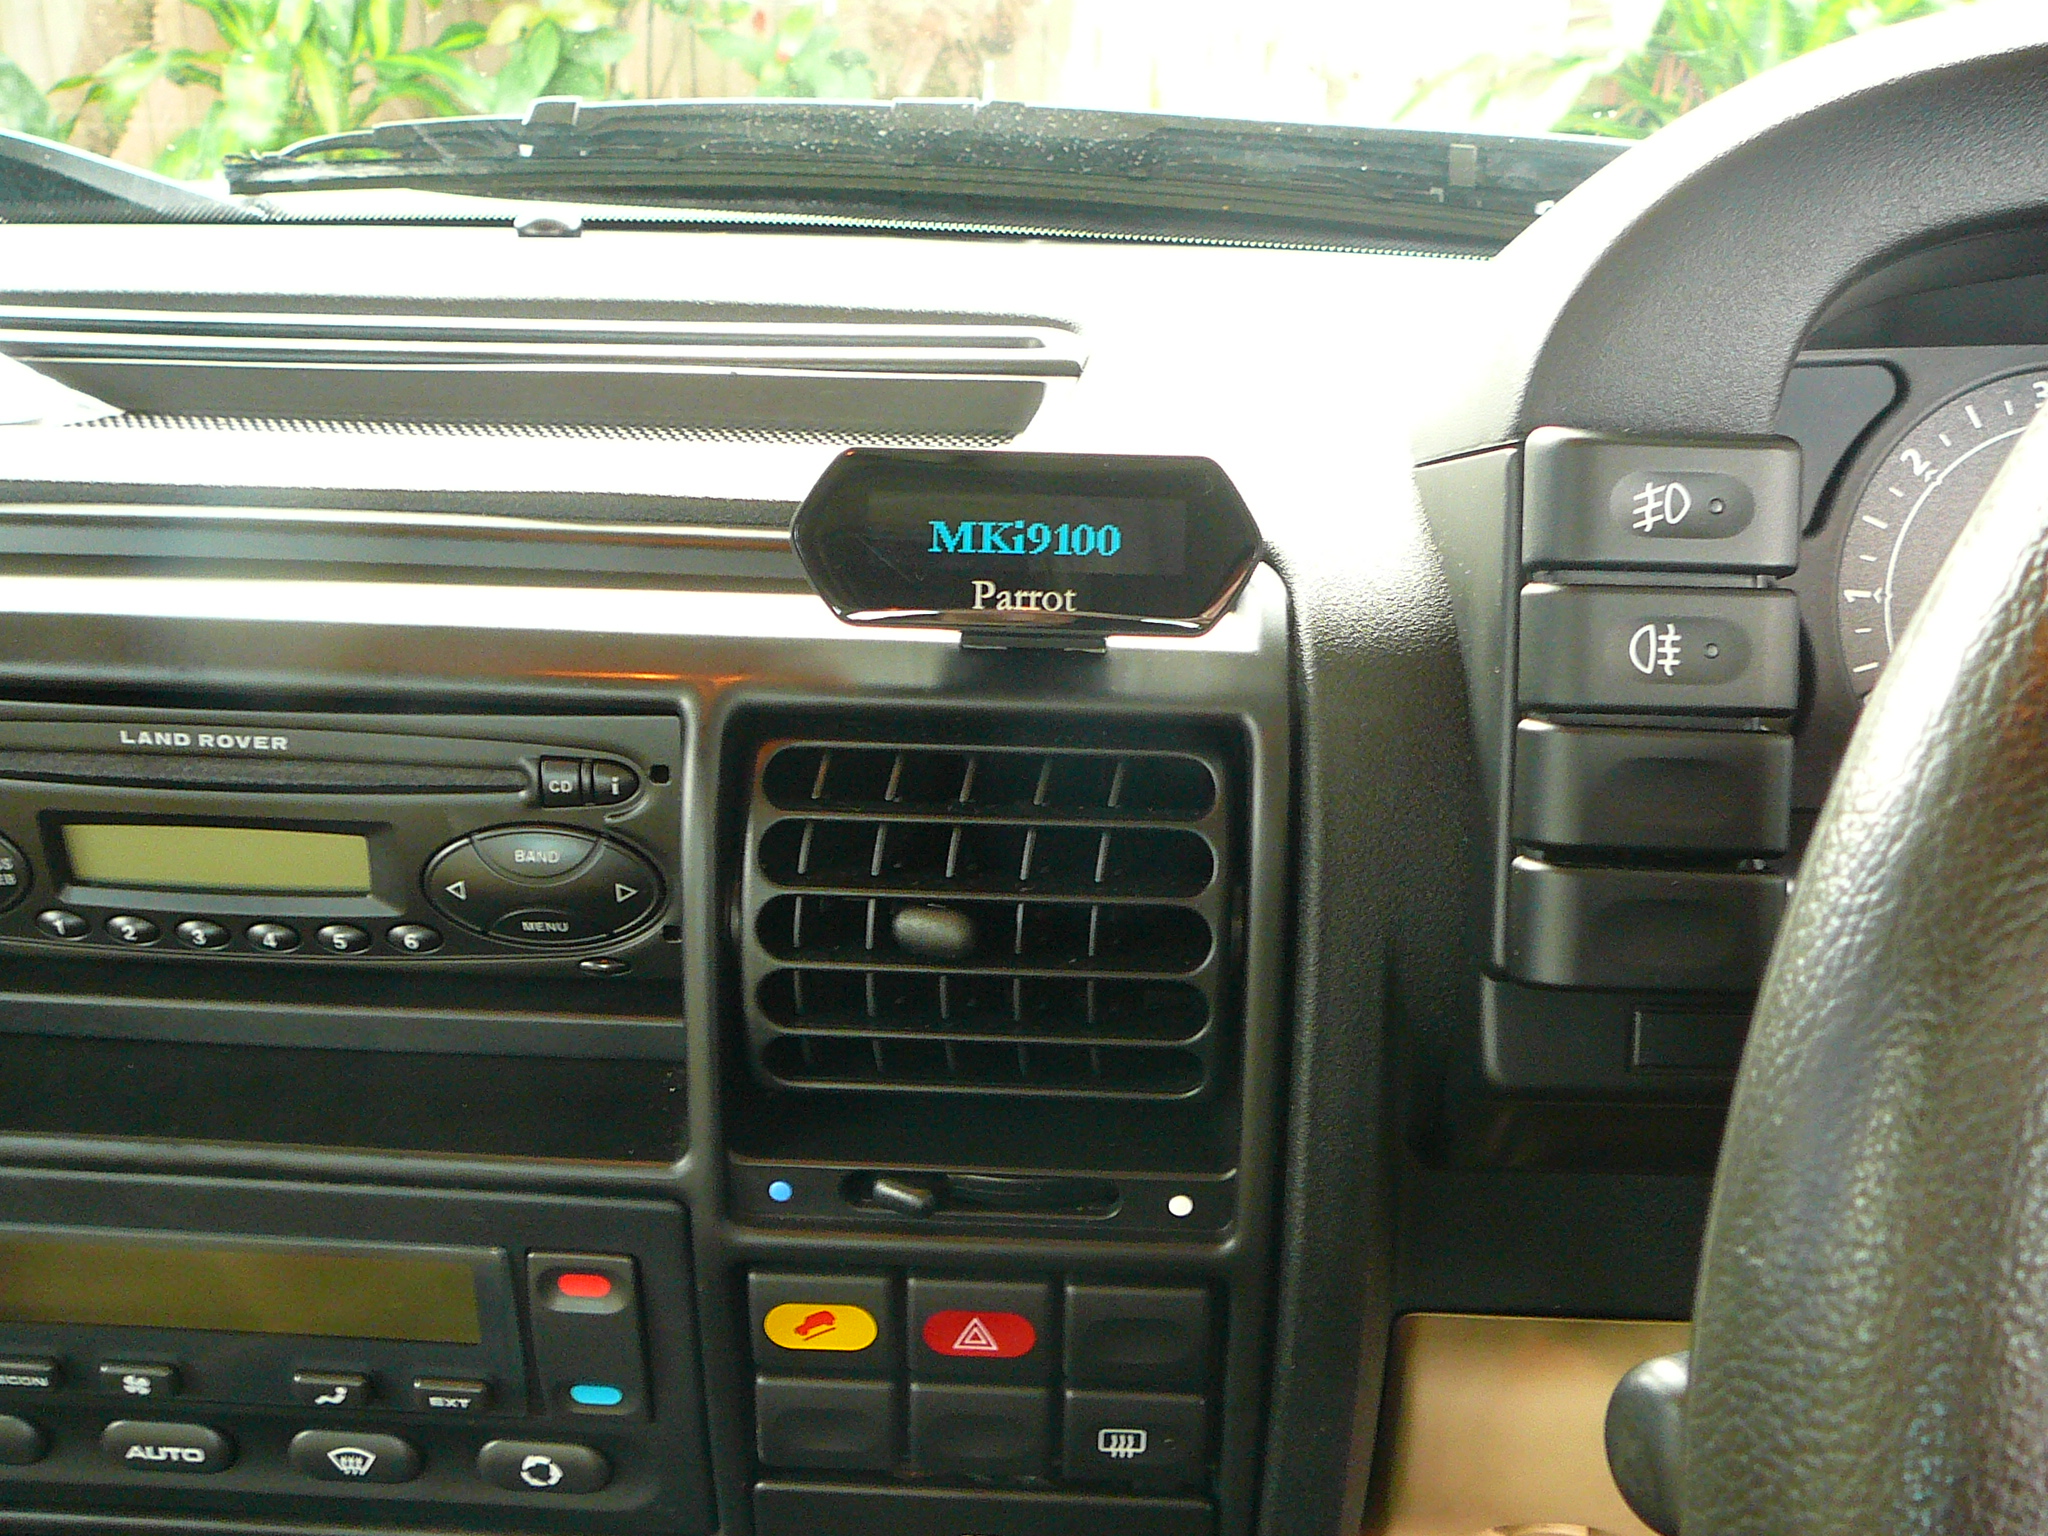 Land Rover Discovery series2, Parrot bluetooth phone kit install